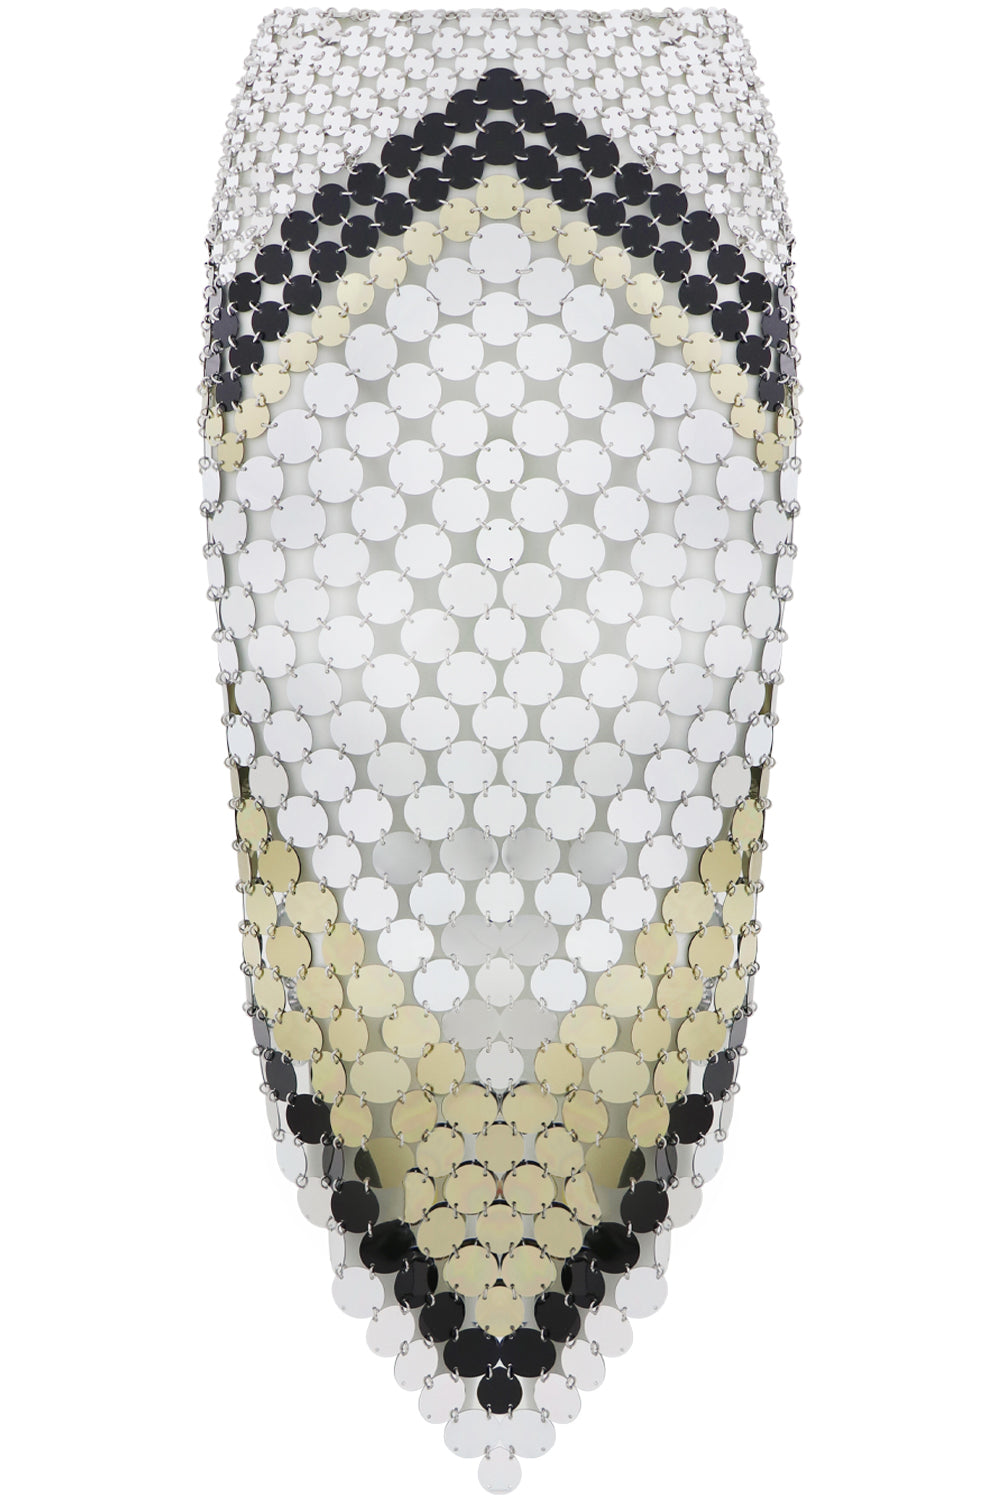 PACO RABANNE RTW ICONIC DISC SKIRT BLACK/GOLD/SILVER